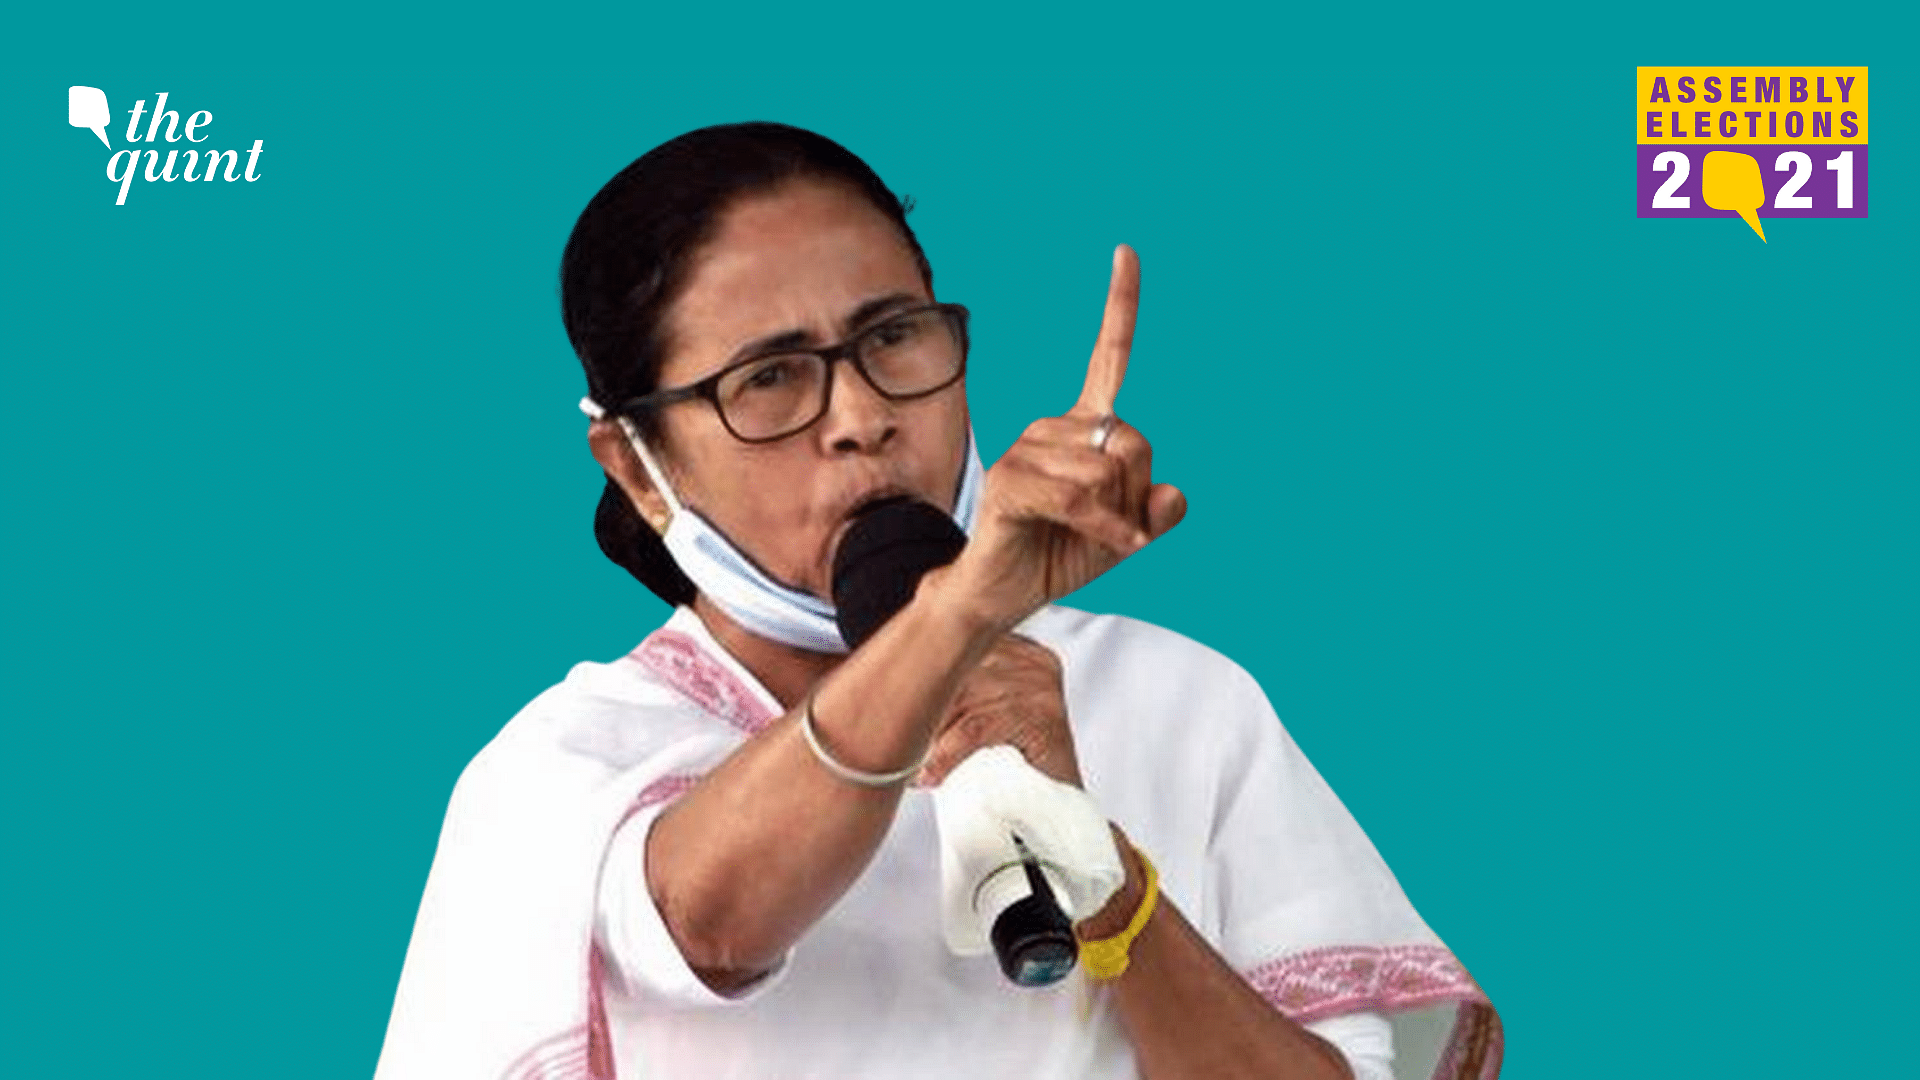 Addressing a public rally in Domjur, West Bengal Chief Minister Mamata Banerjee on Thursday, 8 April, slammed the Election Commission. 